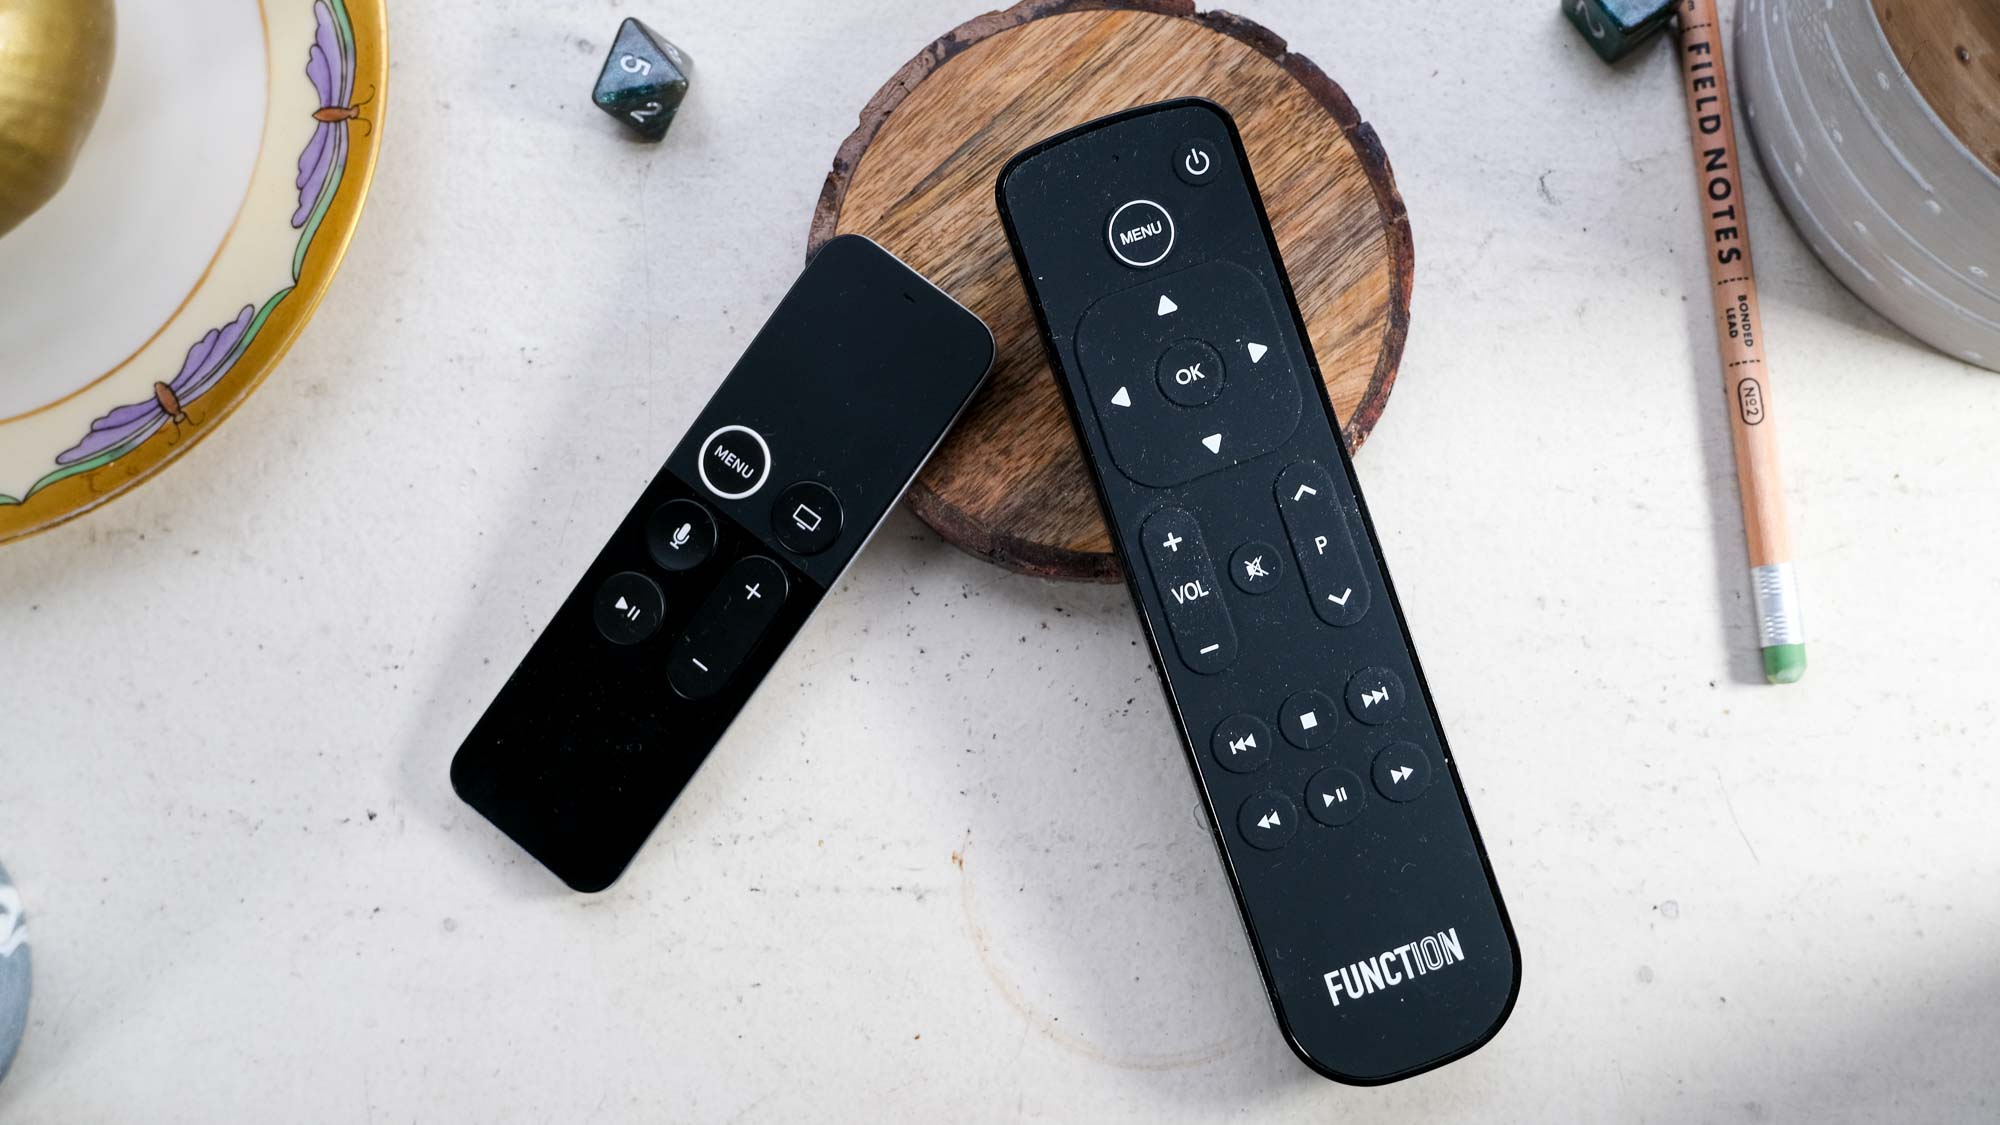 Apple TV 2021 — Apple should this remote now | Tom's Guide